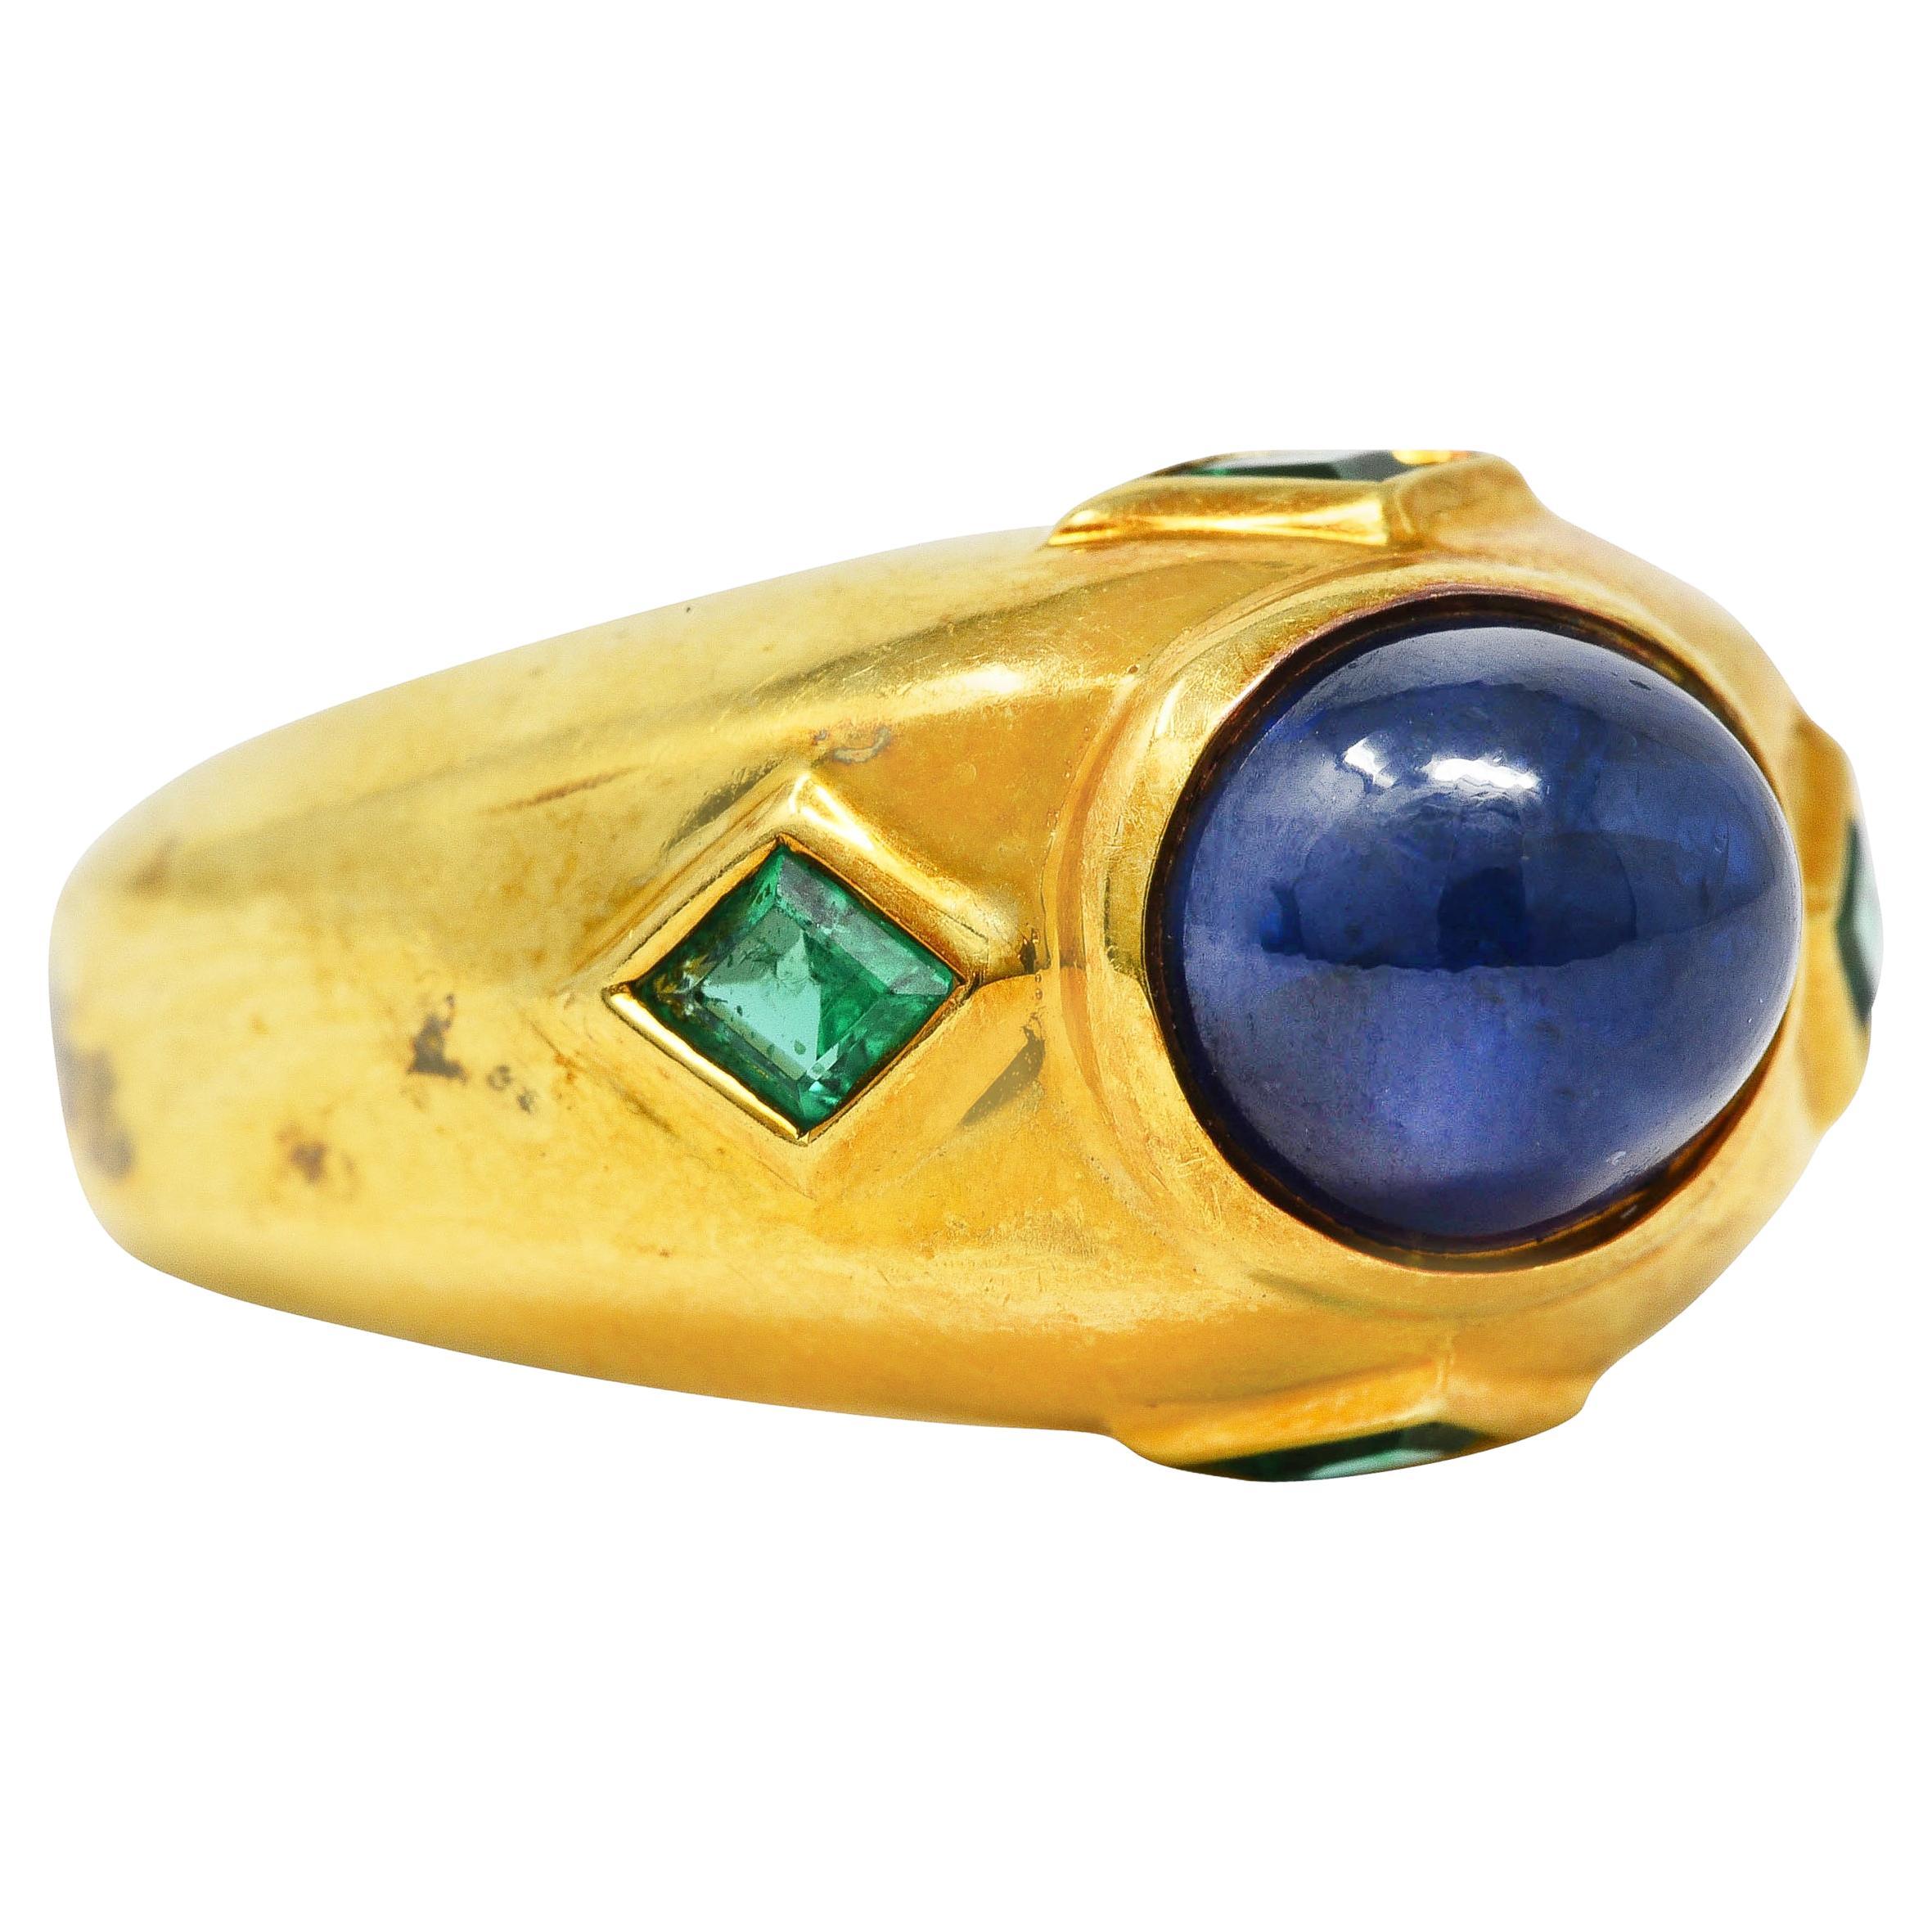 Yellow gold bombè band centers a sapphire cabochon weighing approximately 4.85 carat. Blue in color and semi-transparent with natural inclusions while exhibiting mild chatoyancy. Bezel set in a polished gold surround with navette cut emerald accents